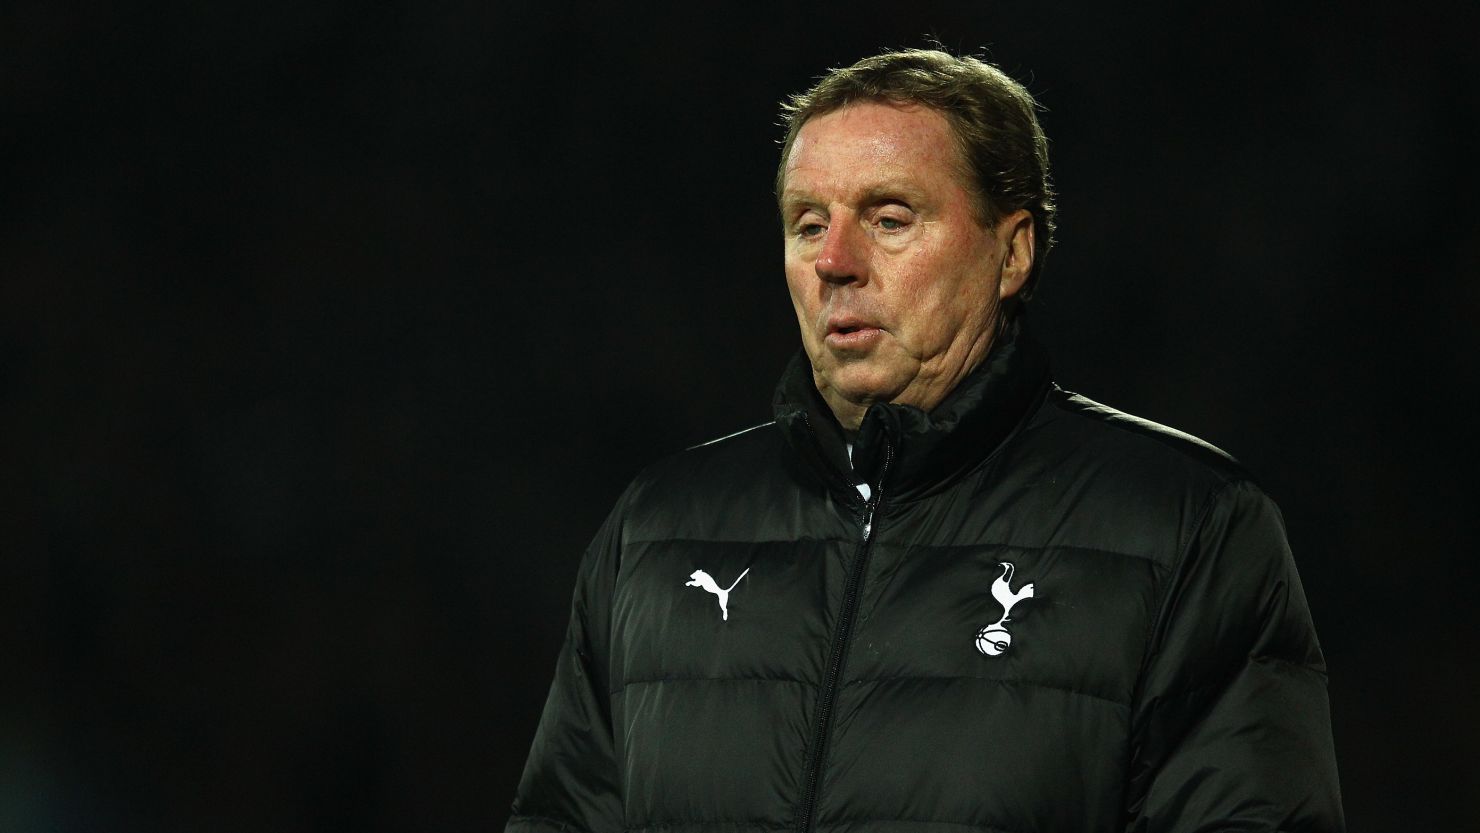 Tottenham Hotspur manager Harry Redknapp watches on anxiously in his side's 1-0 win at Watford.